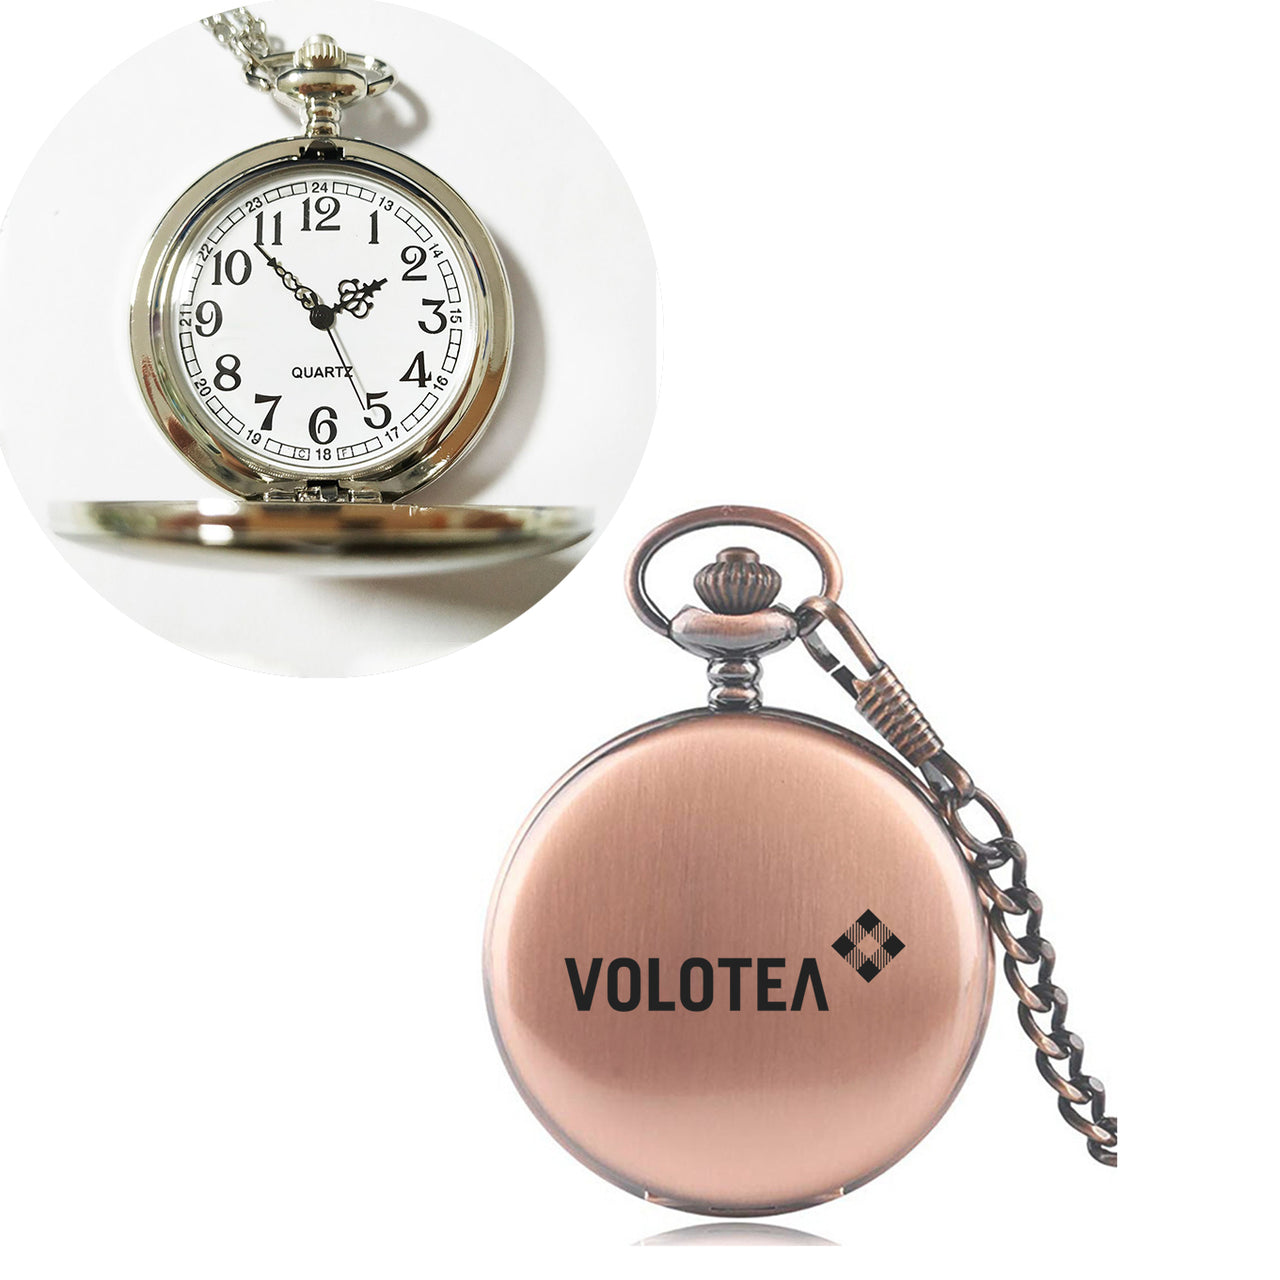 Volotea Airlines Designed Pocket Watches